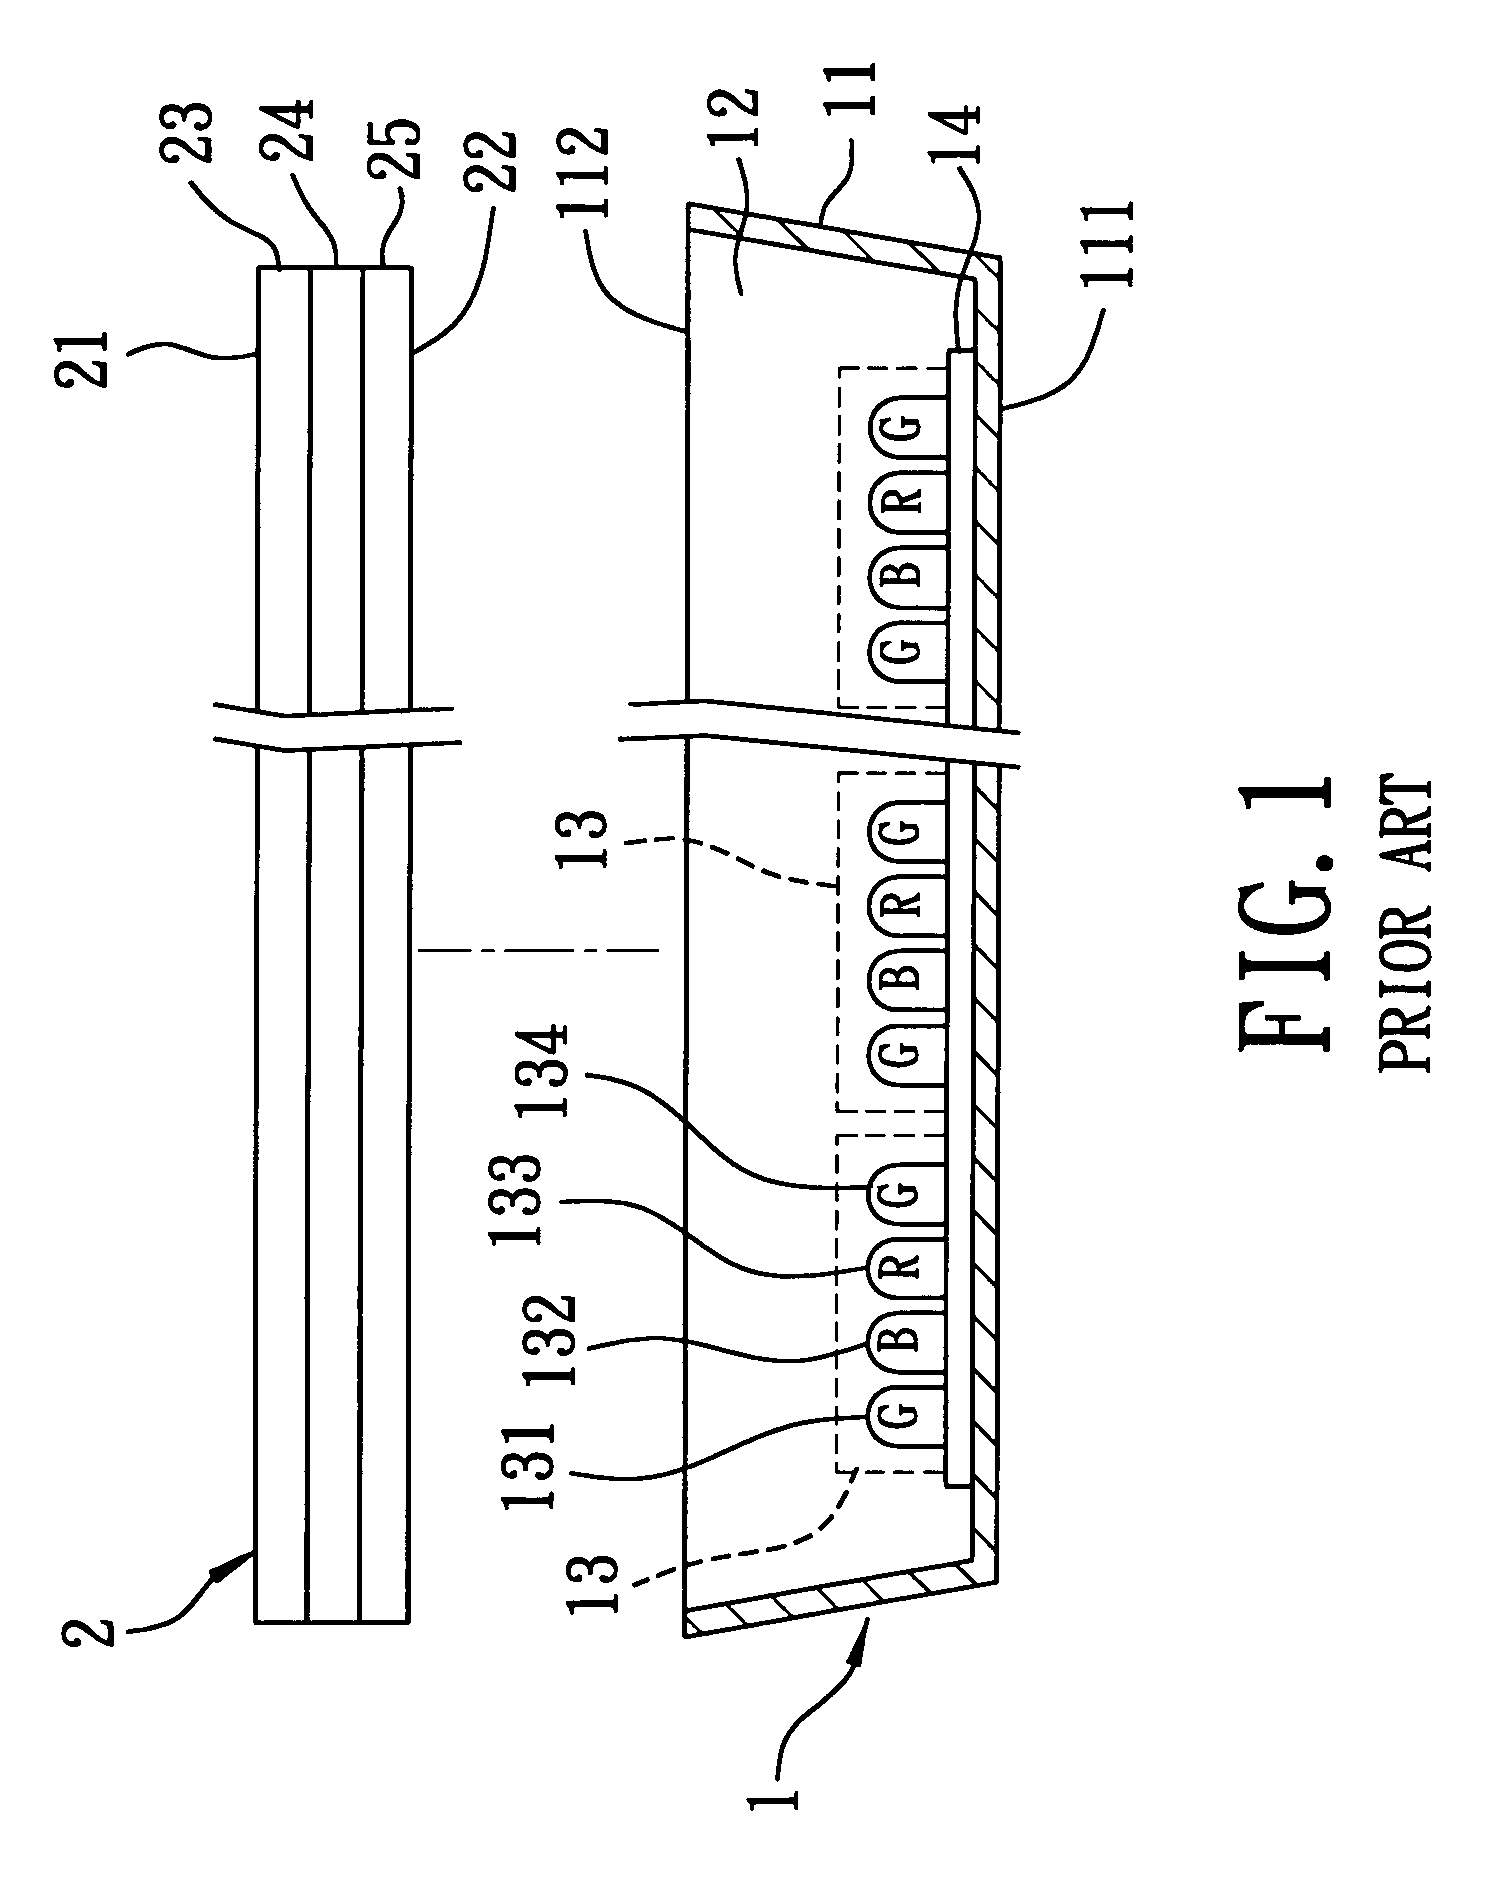 White-light emitting device and the use thereof